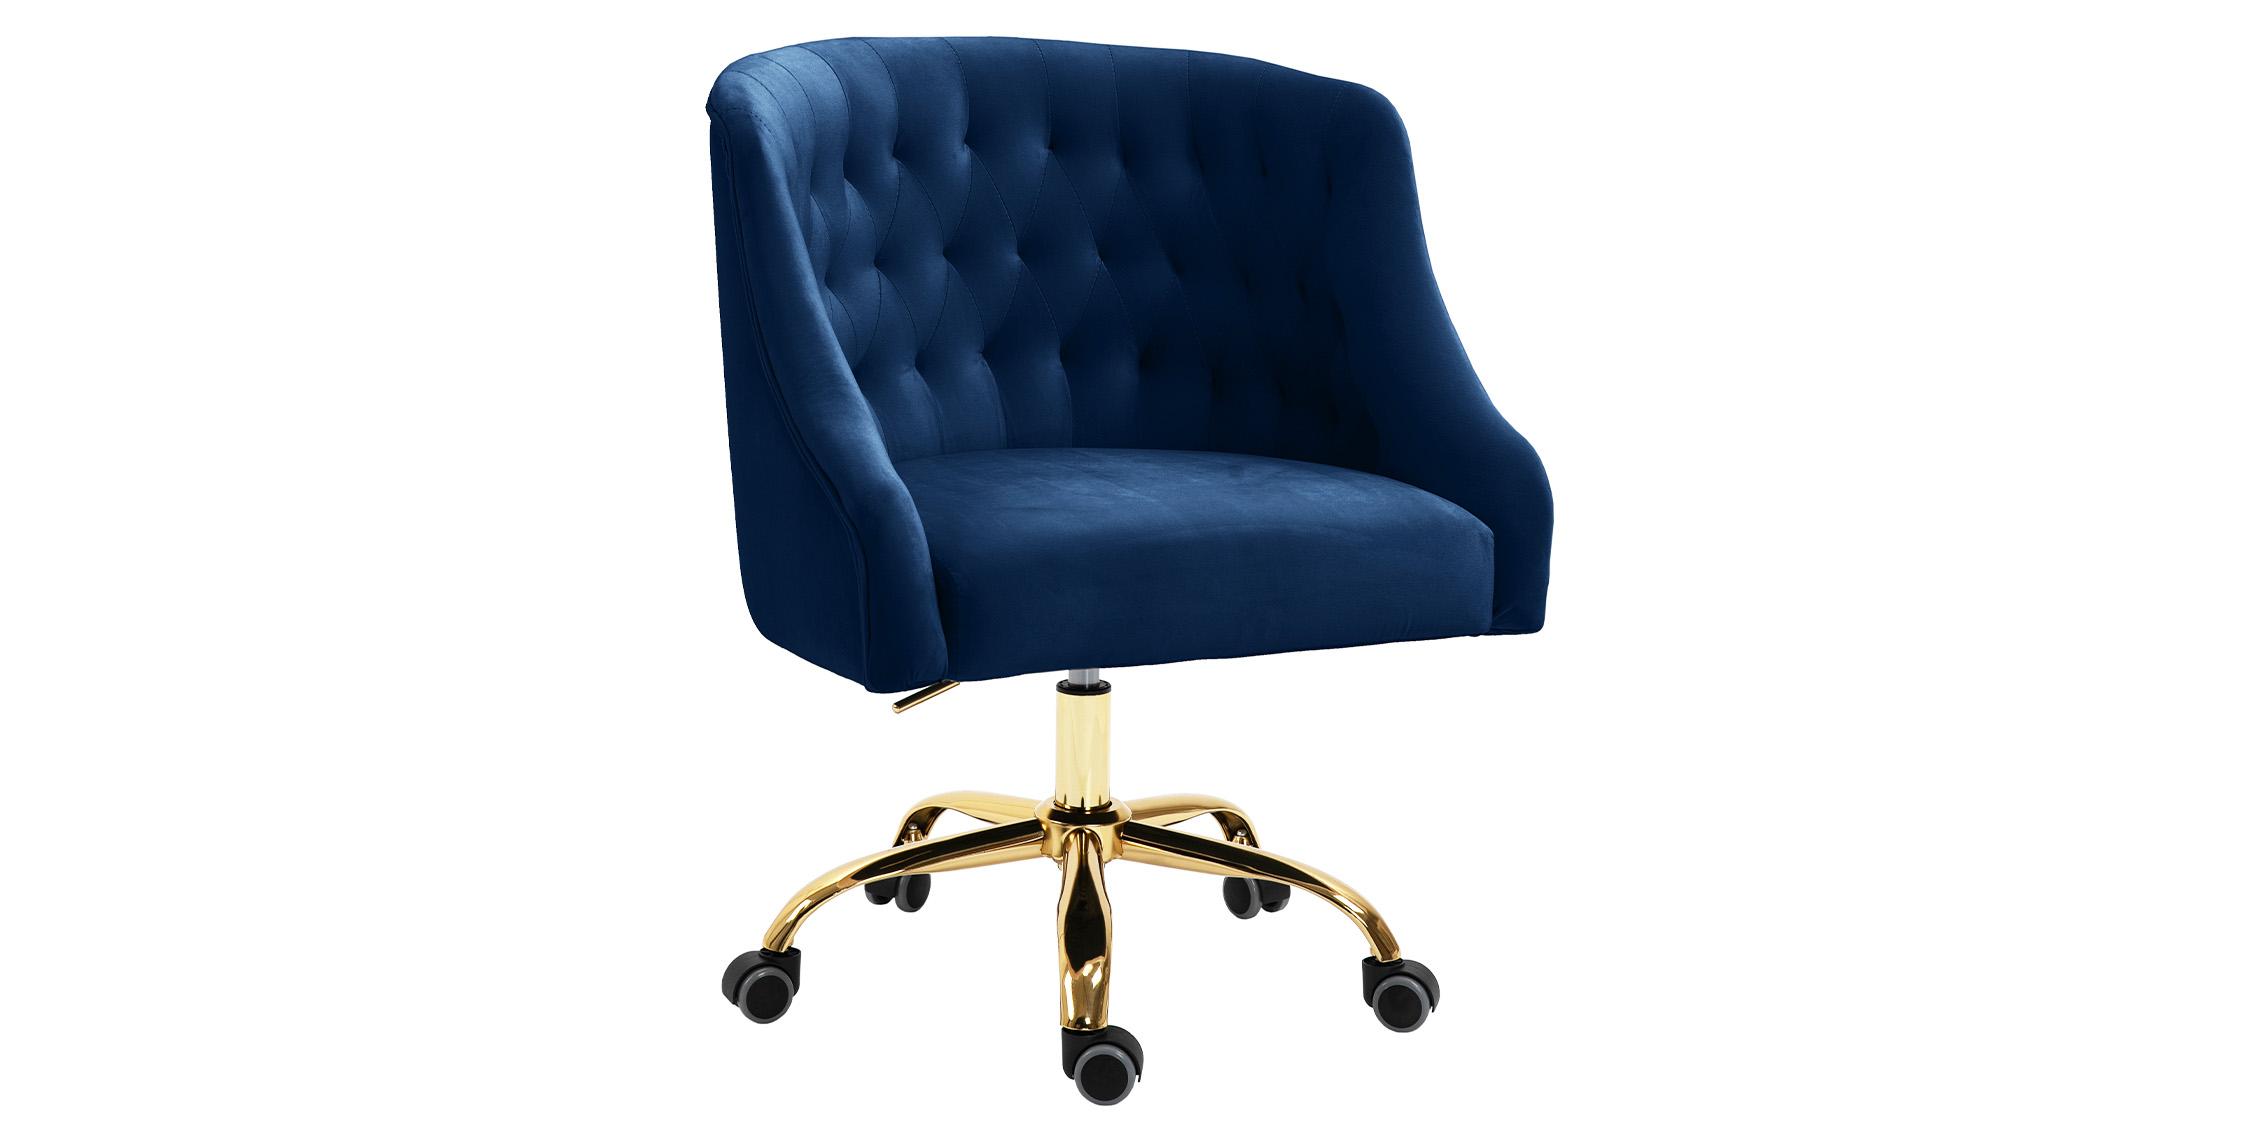 Contemporary, Modern Office Chair ARDEN 161Navy 161Navy in Navy Fabric